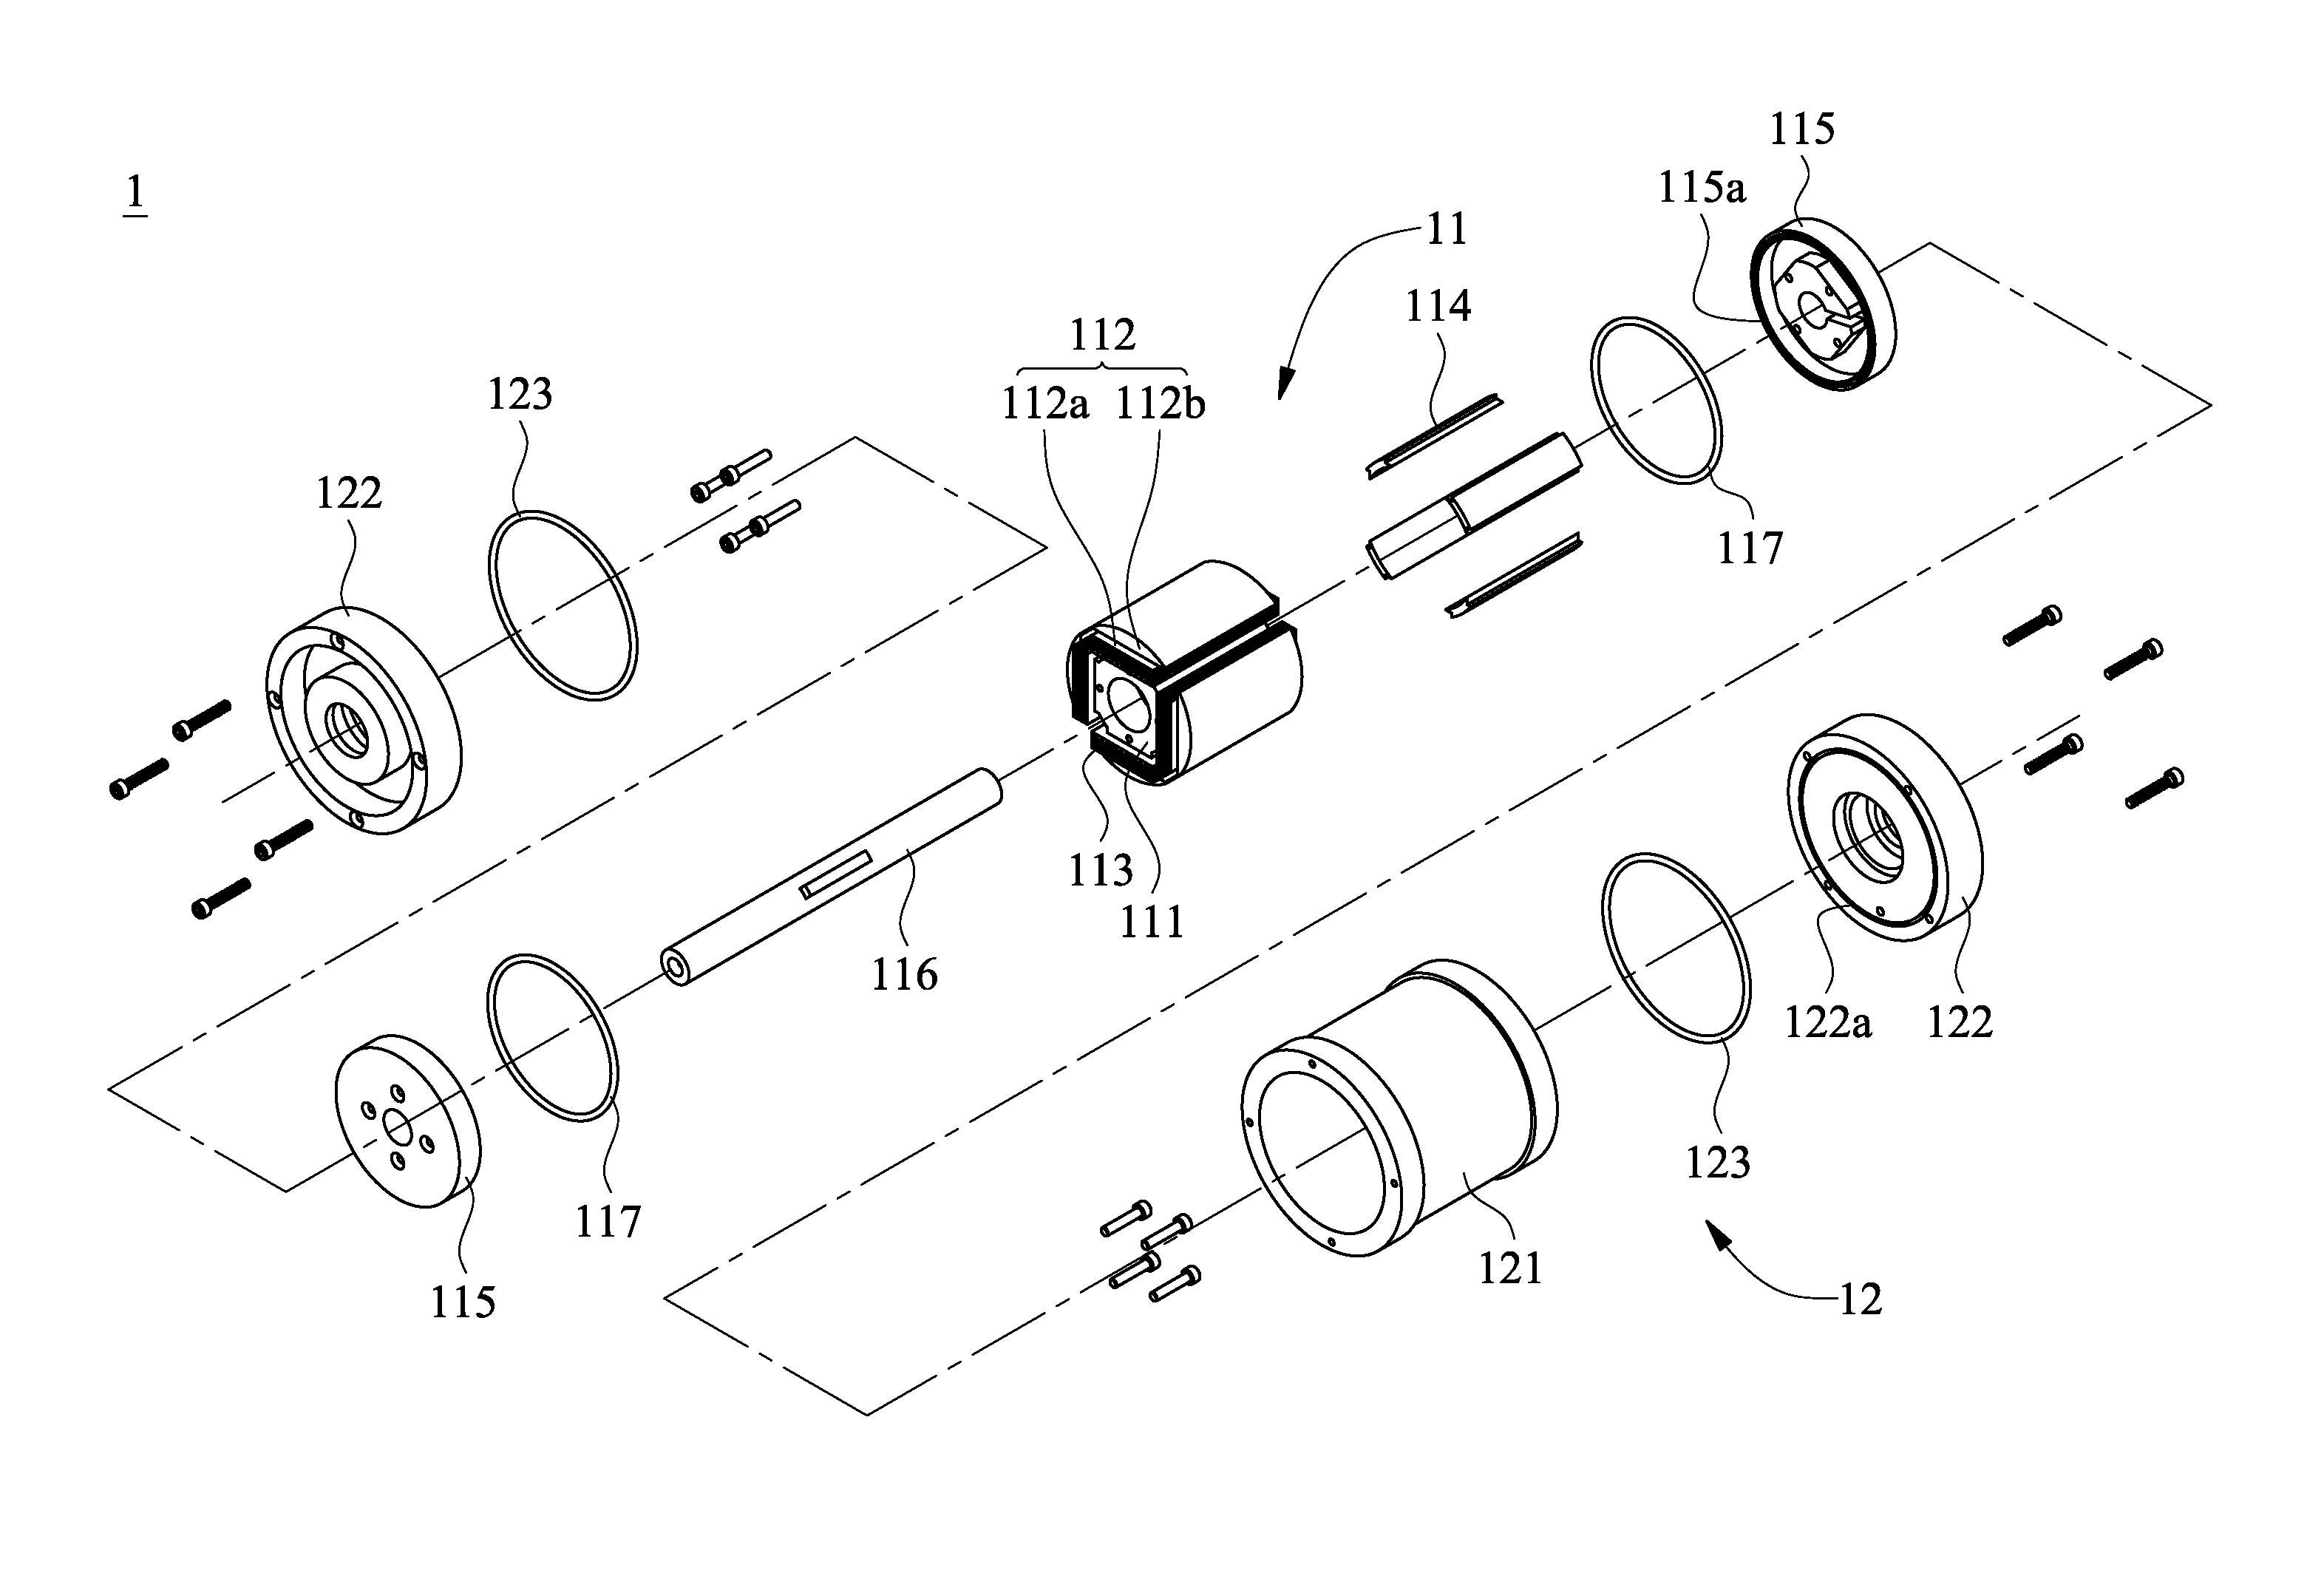 Rotary resistance device